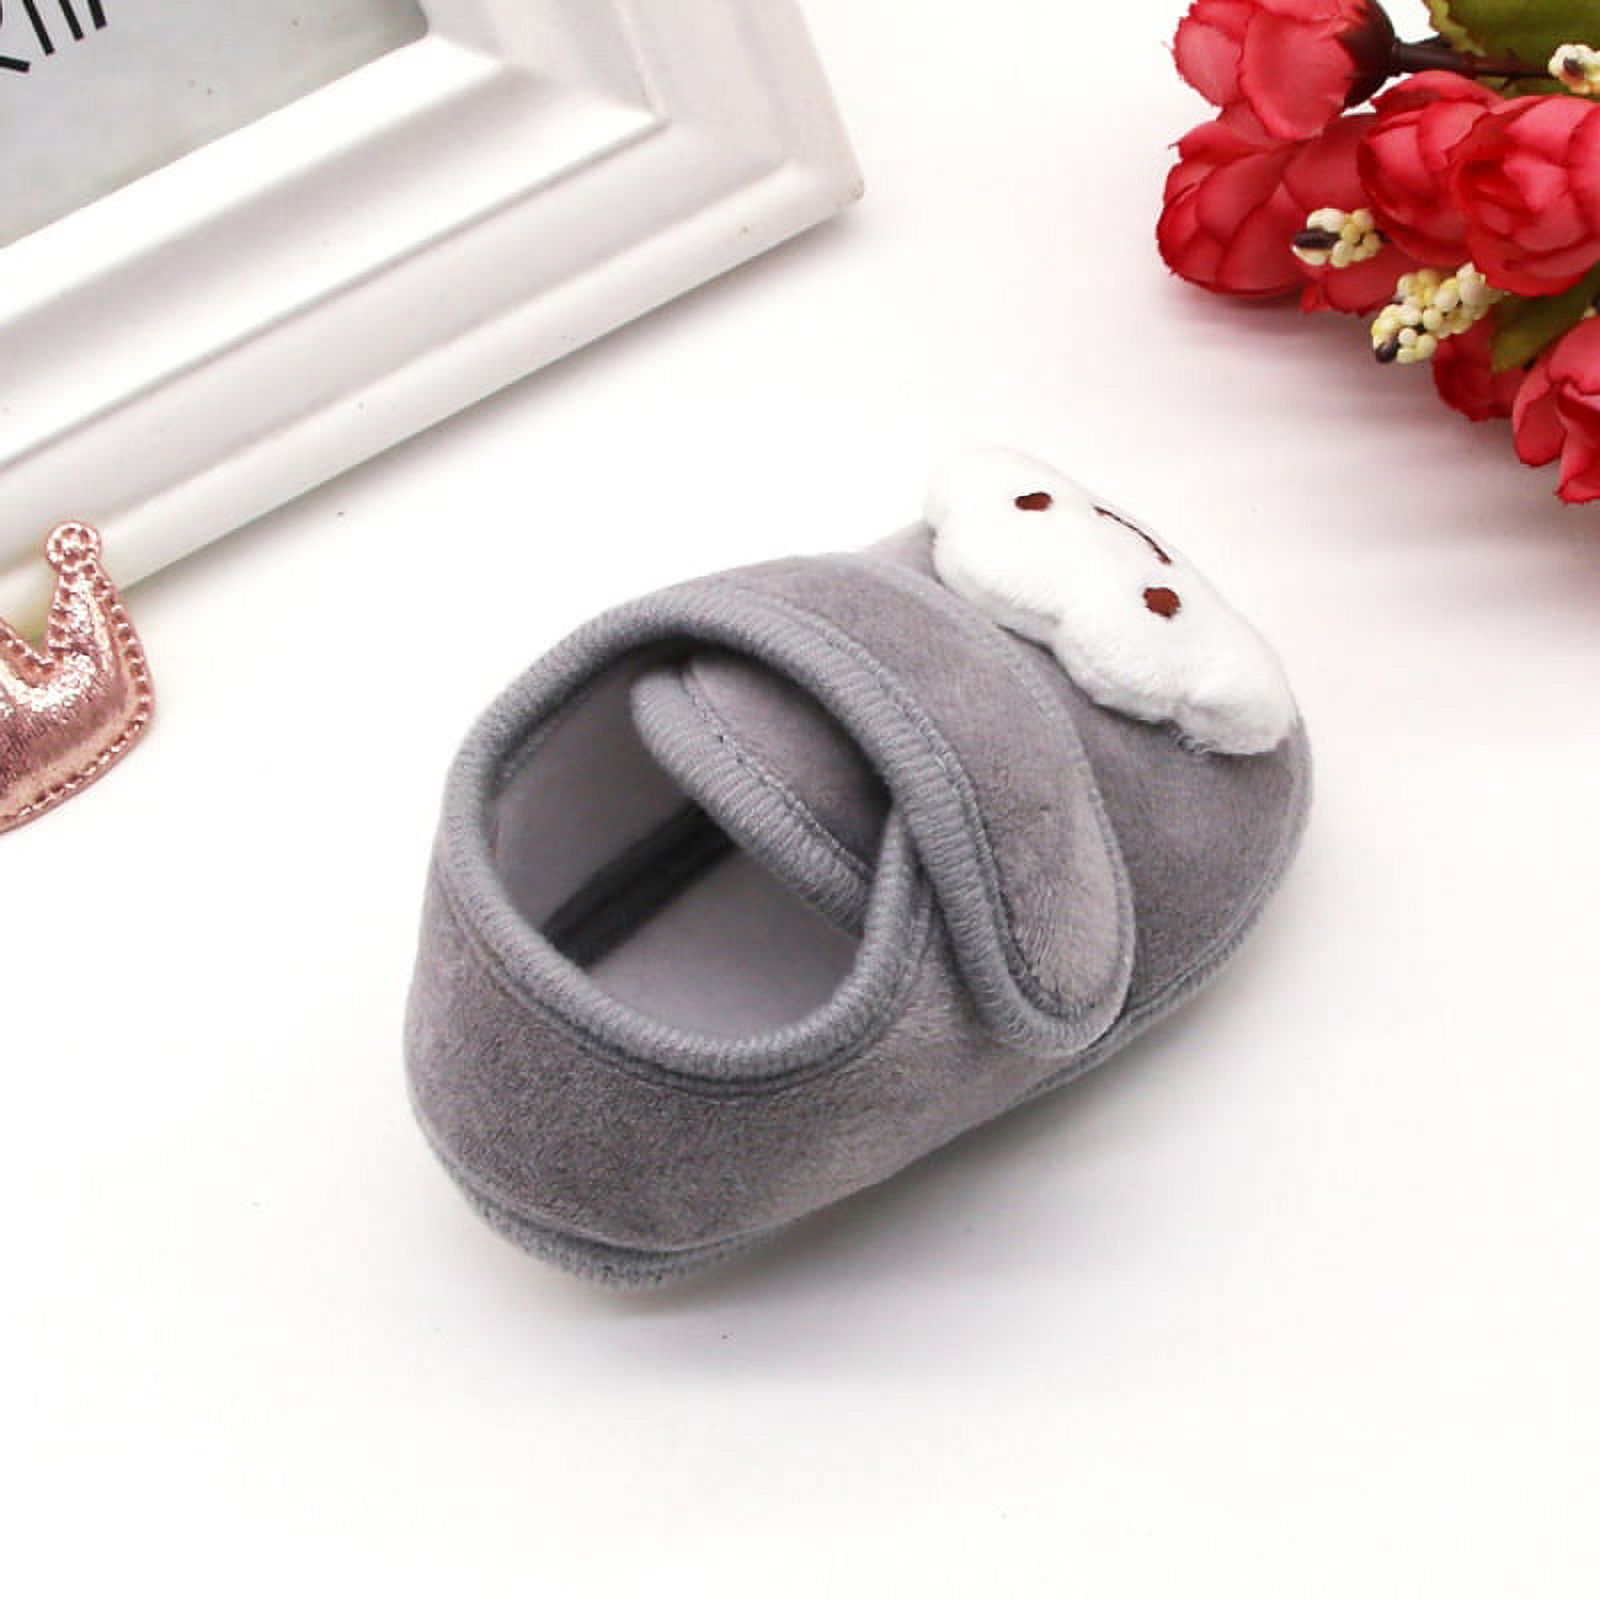 Infant Baby Boys Girls Slipper Soft Sole Non Skid Sneaker Moccasins Toddler First Walker Crib House Shoes - image 5 of 7